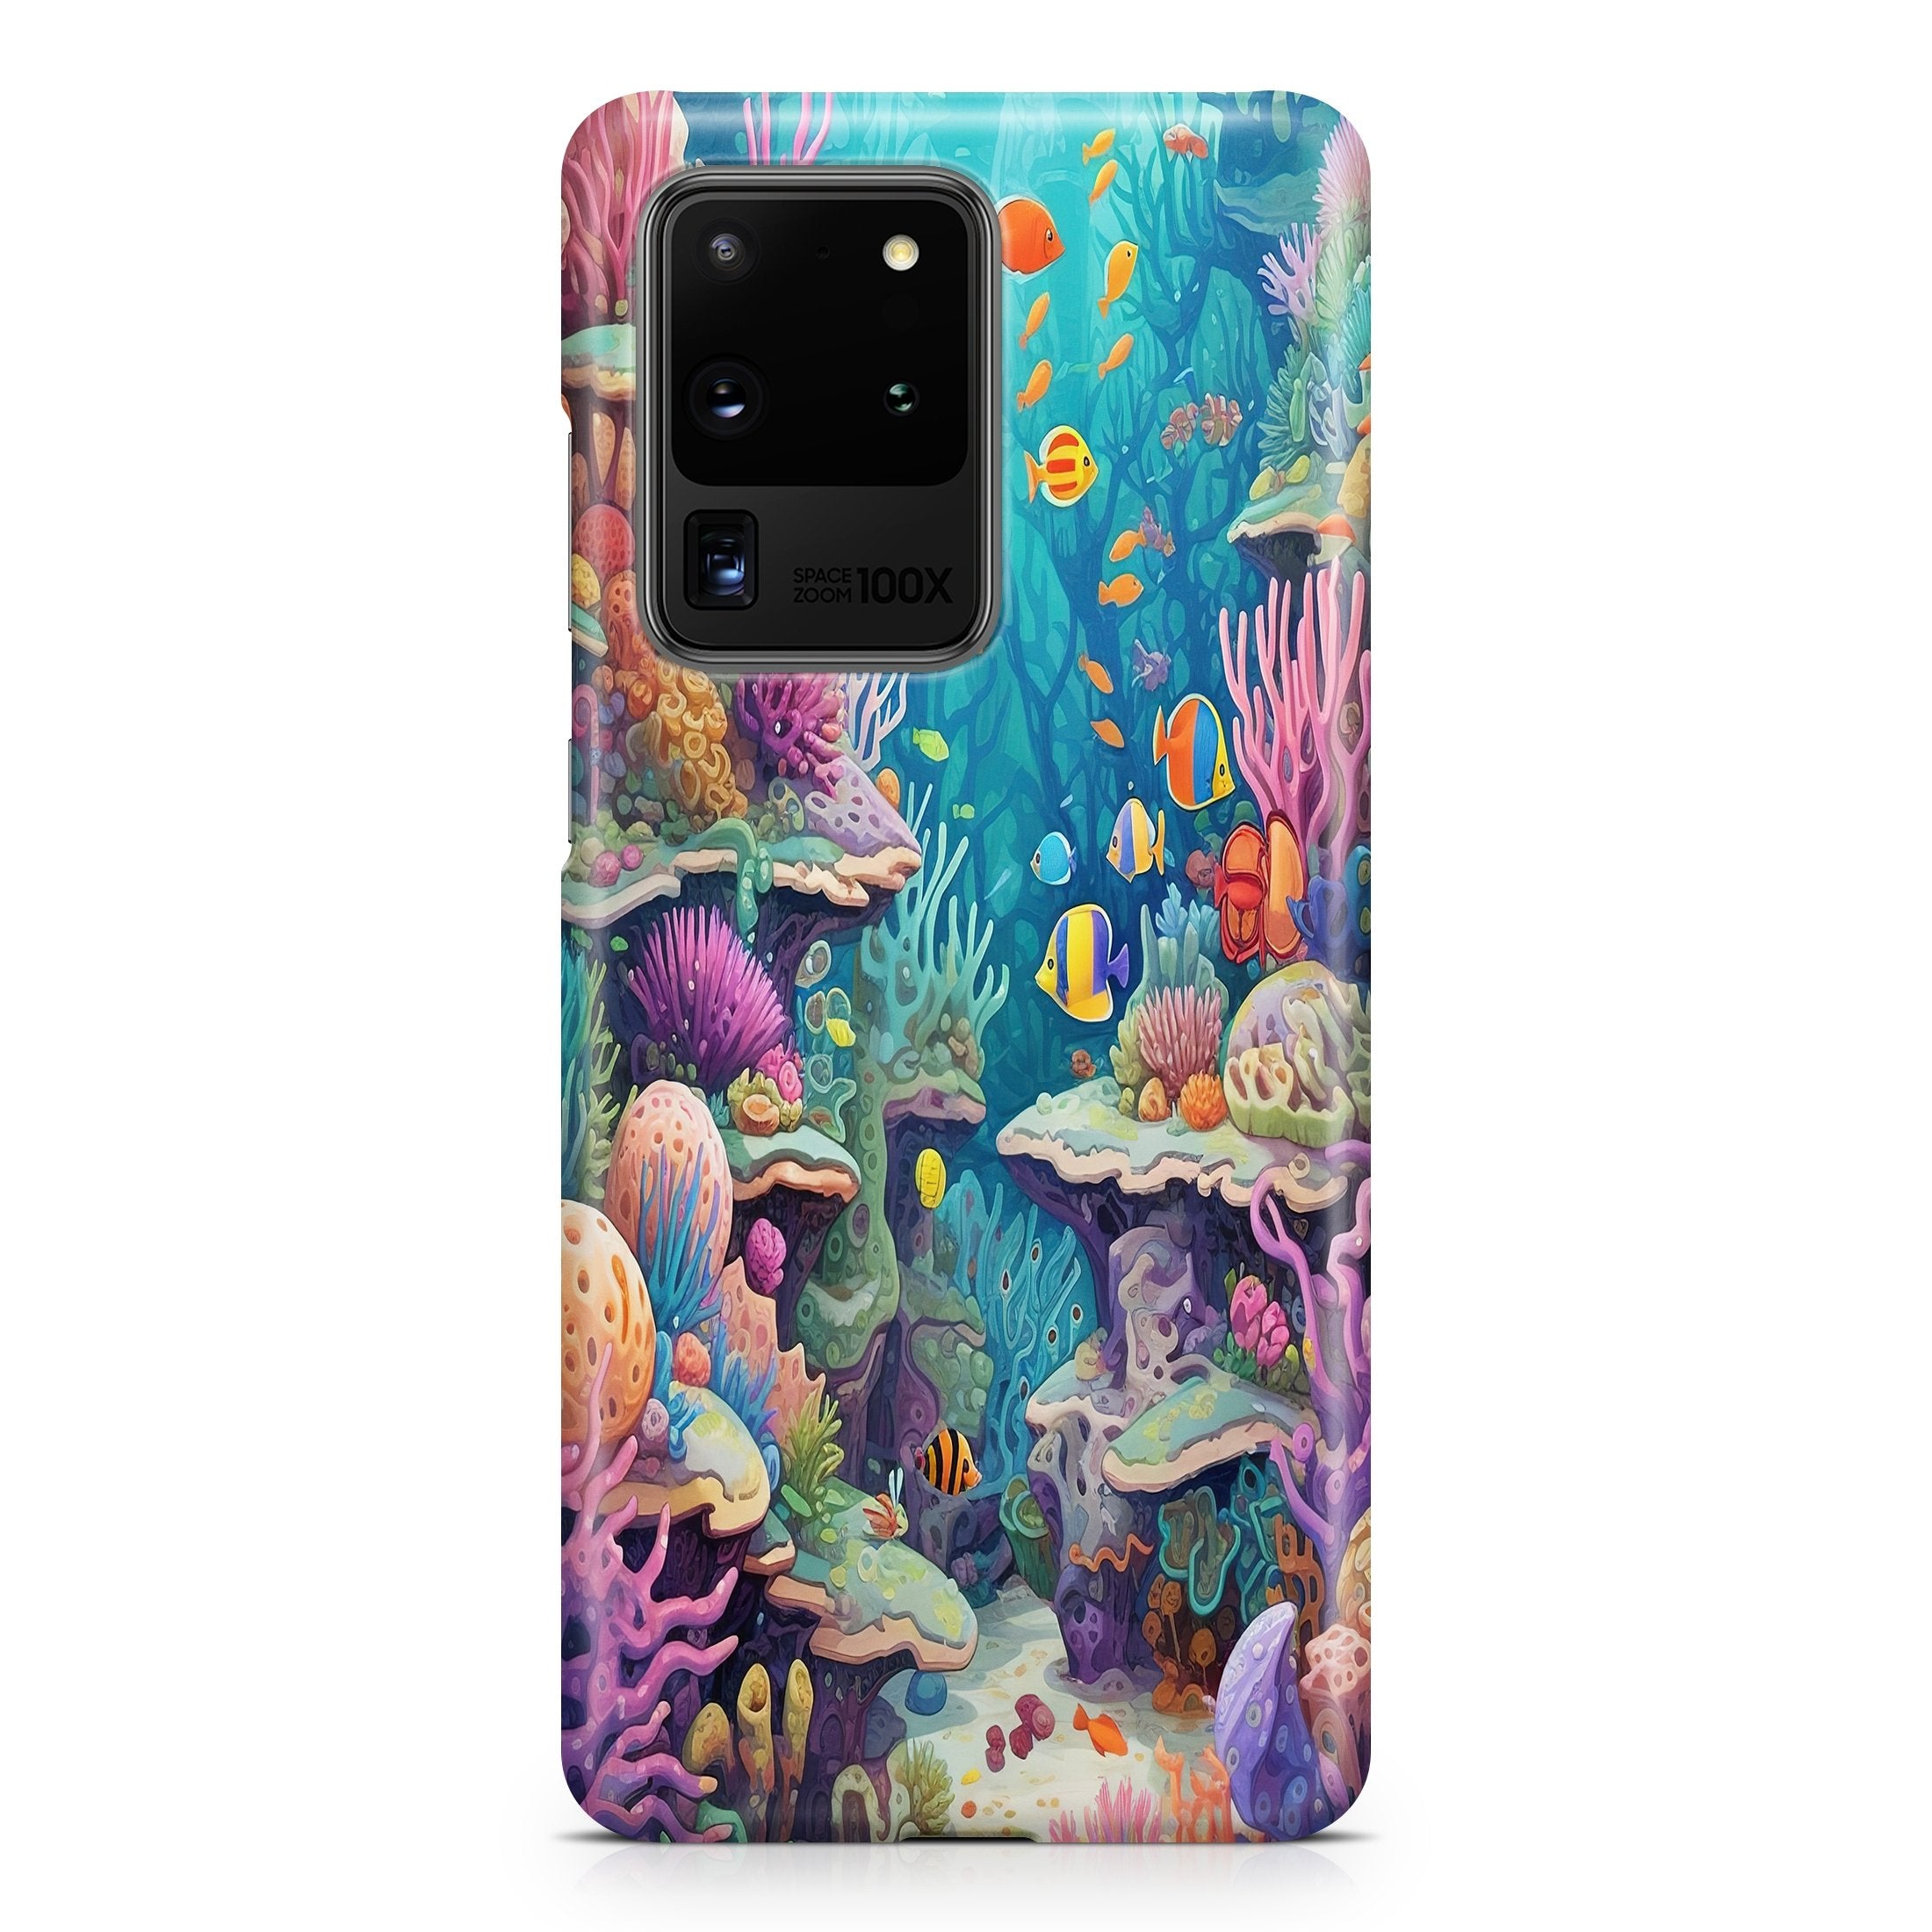 Daydream Coral - Samsung phone case designs by CaseSwagger